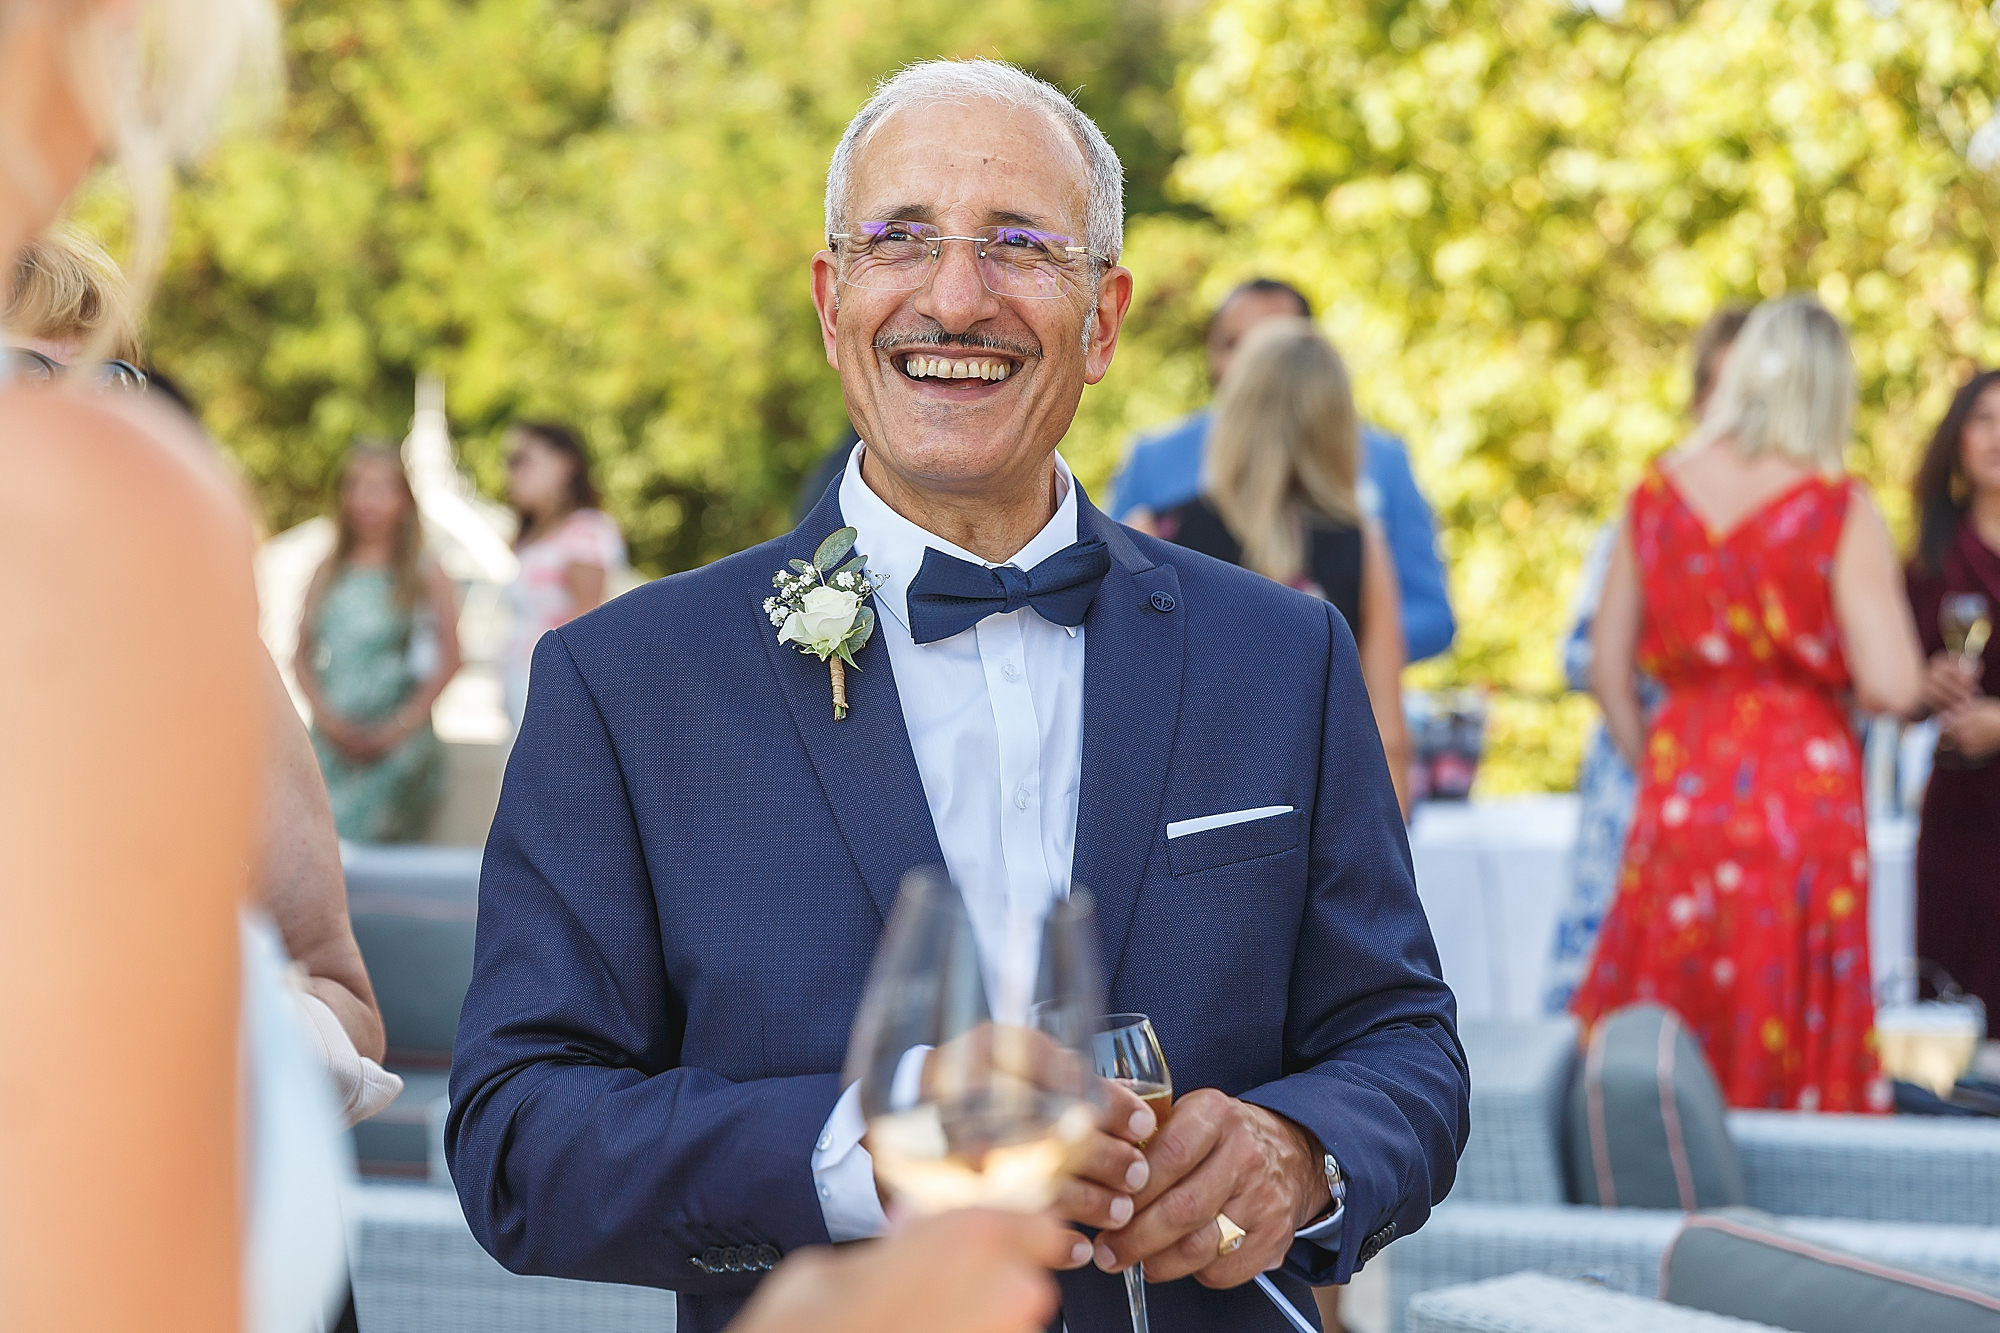 Father of the groom smiling